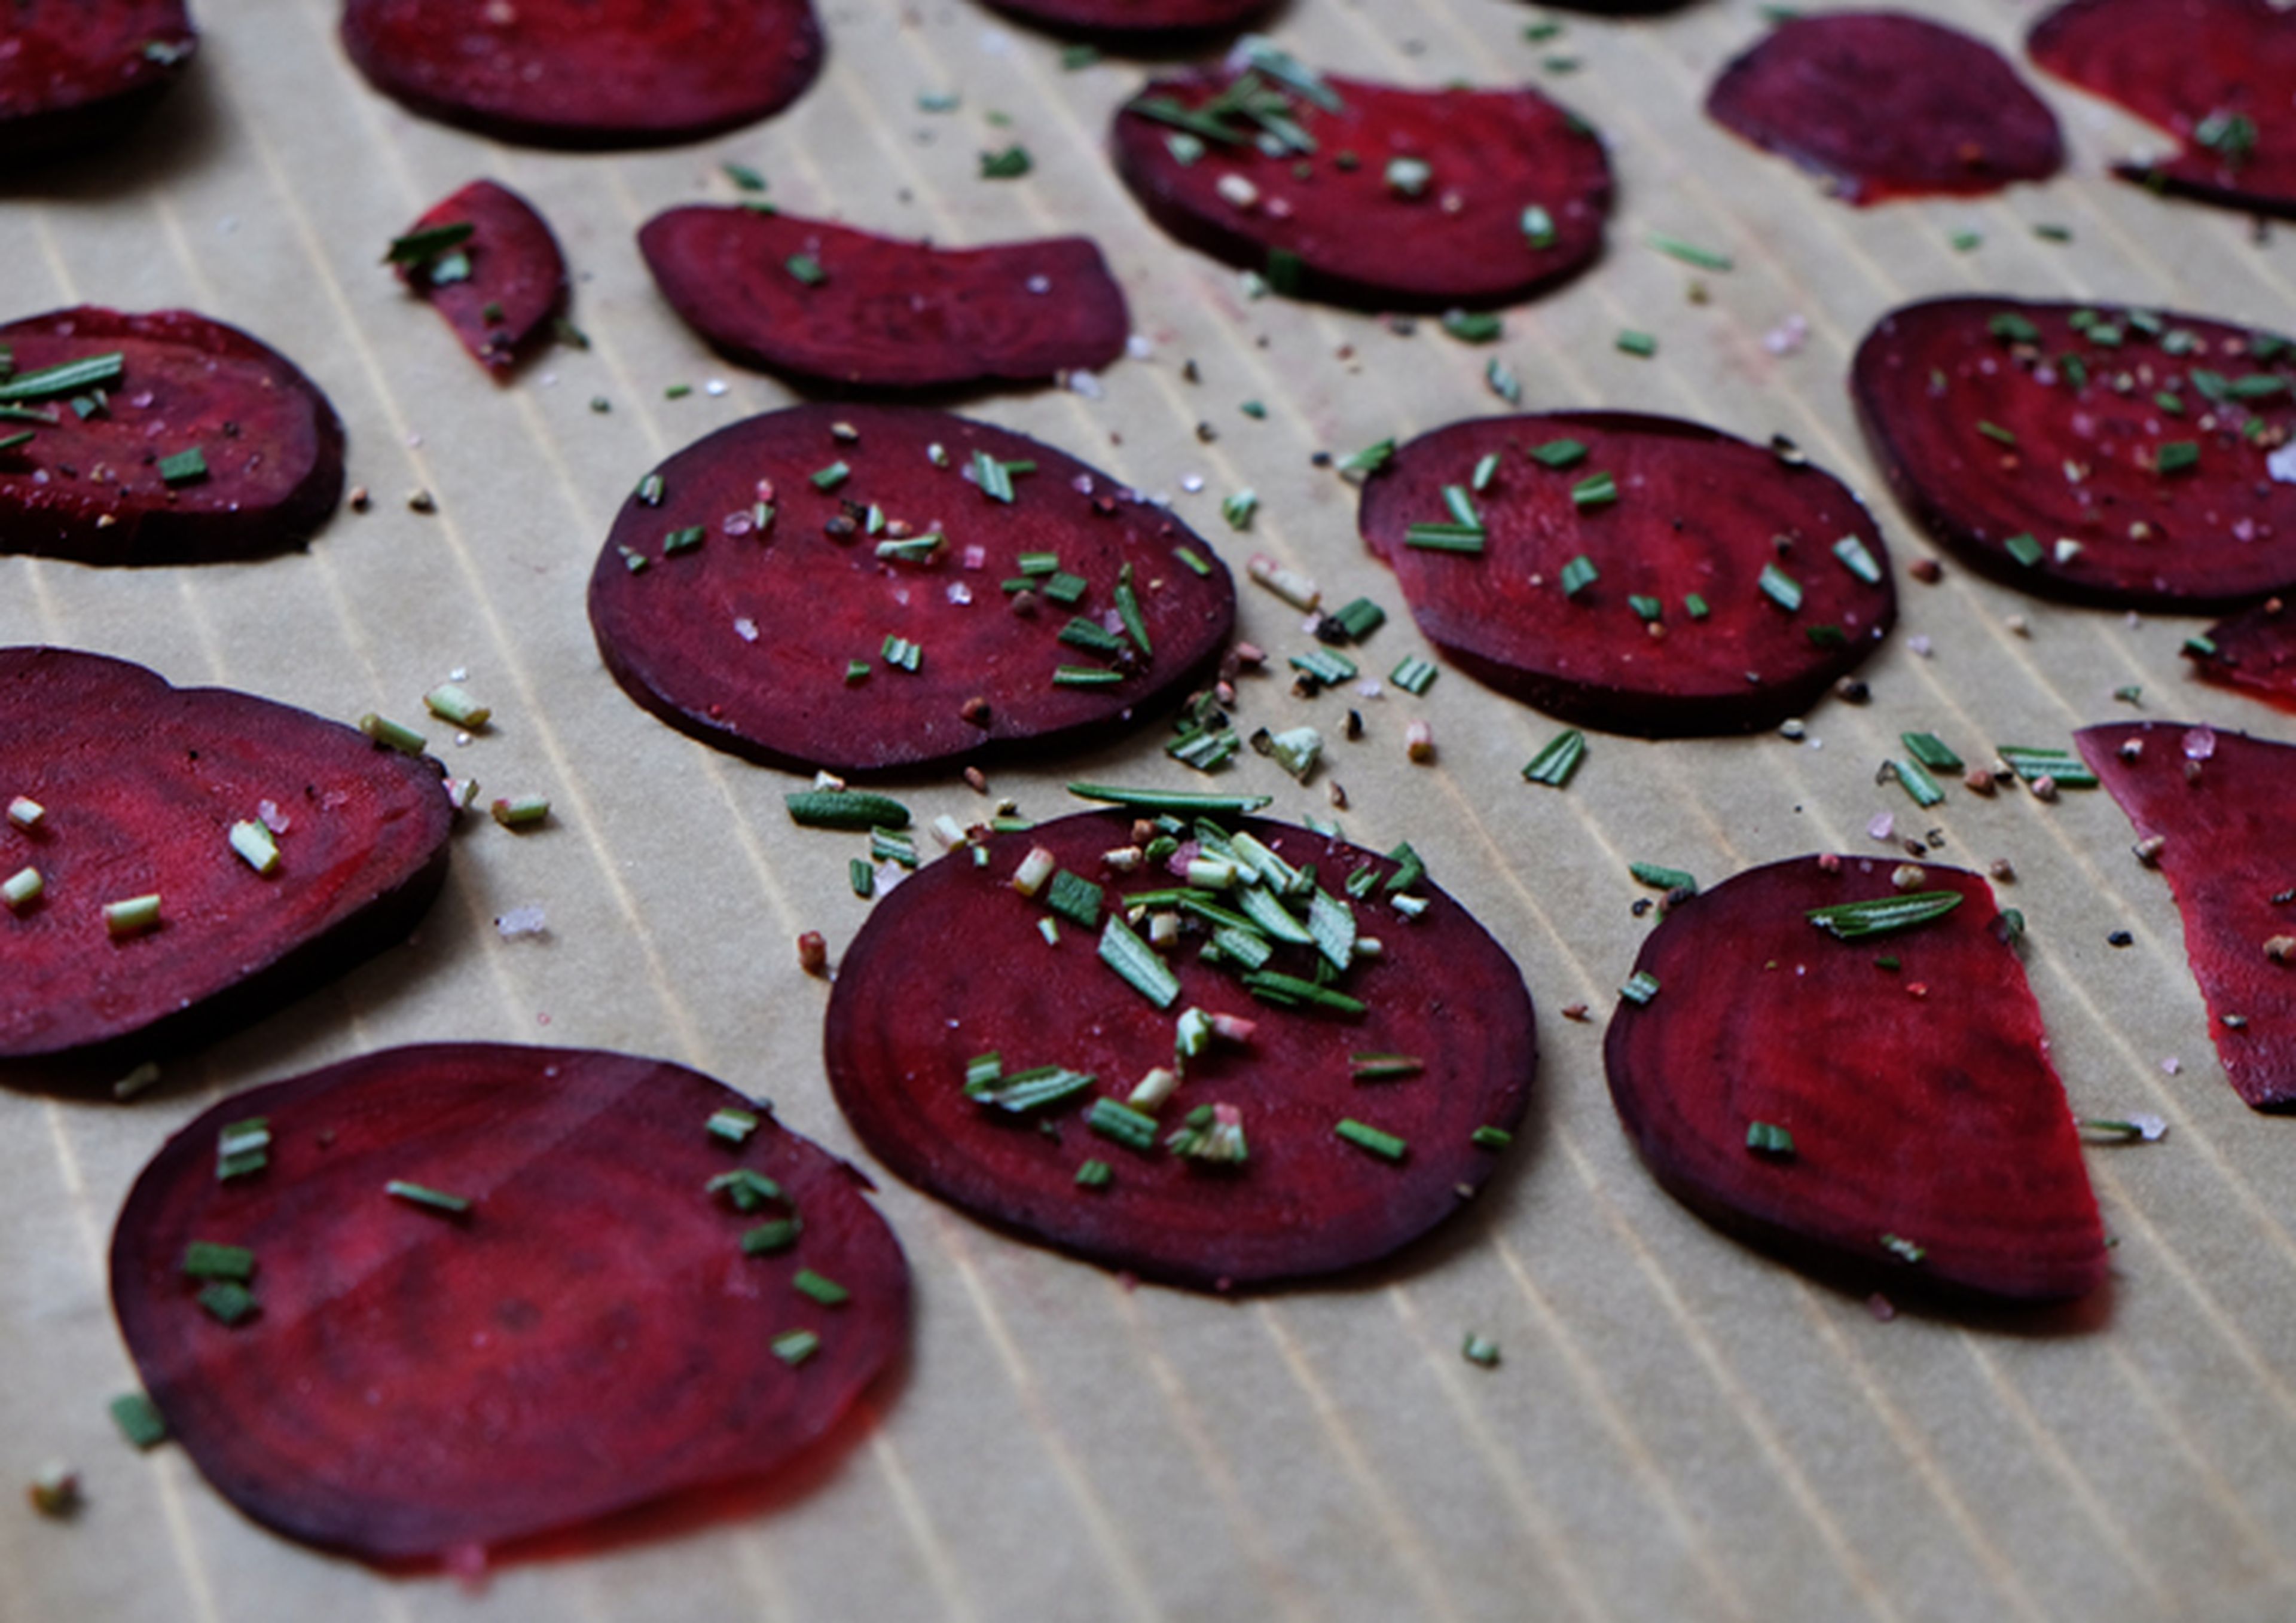 Line oven rack with parchment paper and lay out beetroot slices. Make sure they don’t overlap. Do not use oil or fat. Bake for approx. 12 – 14 min. at 180°C/360°F, turn each one, then bake again for approx. 12 – 14 min.